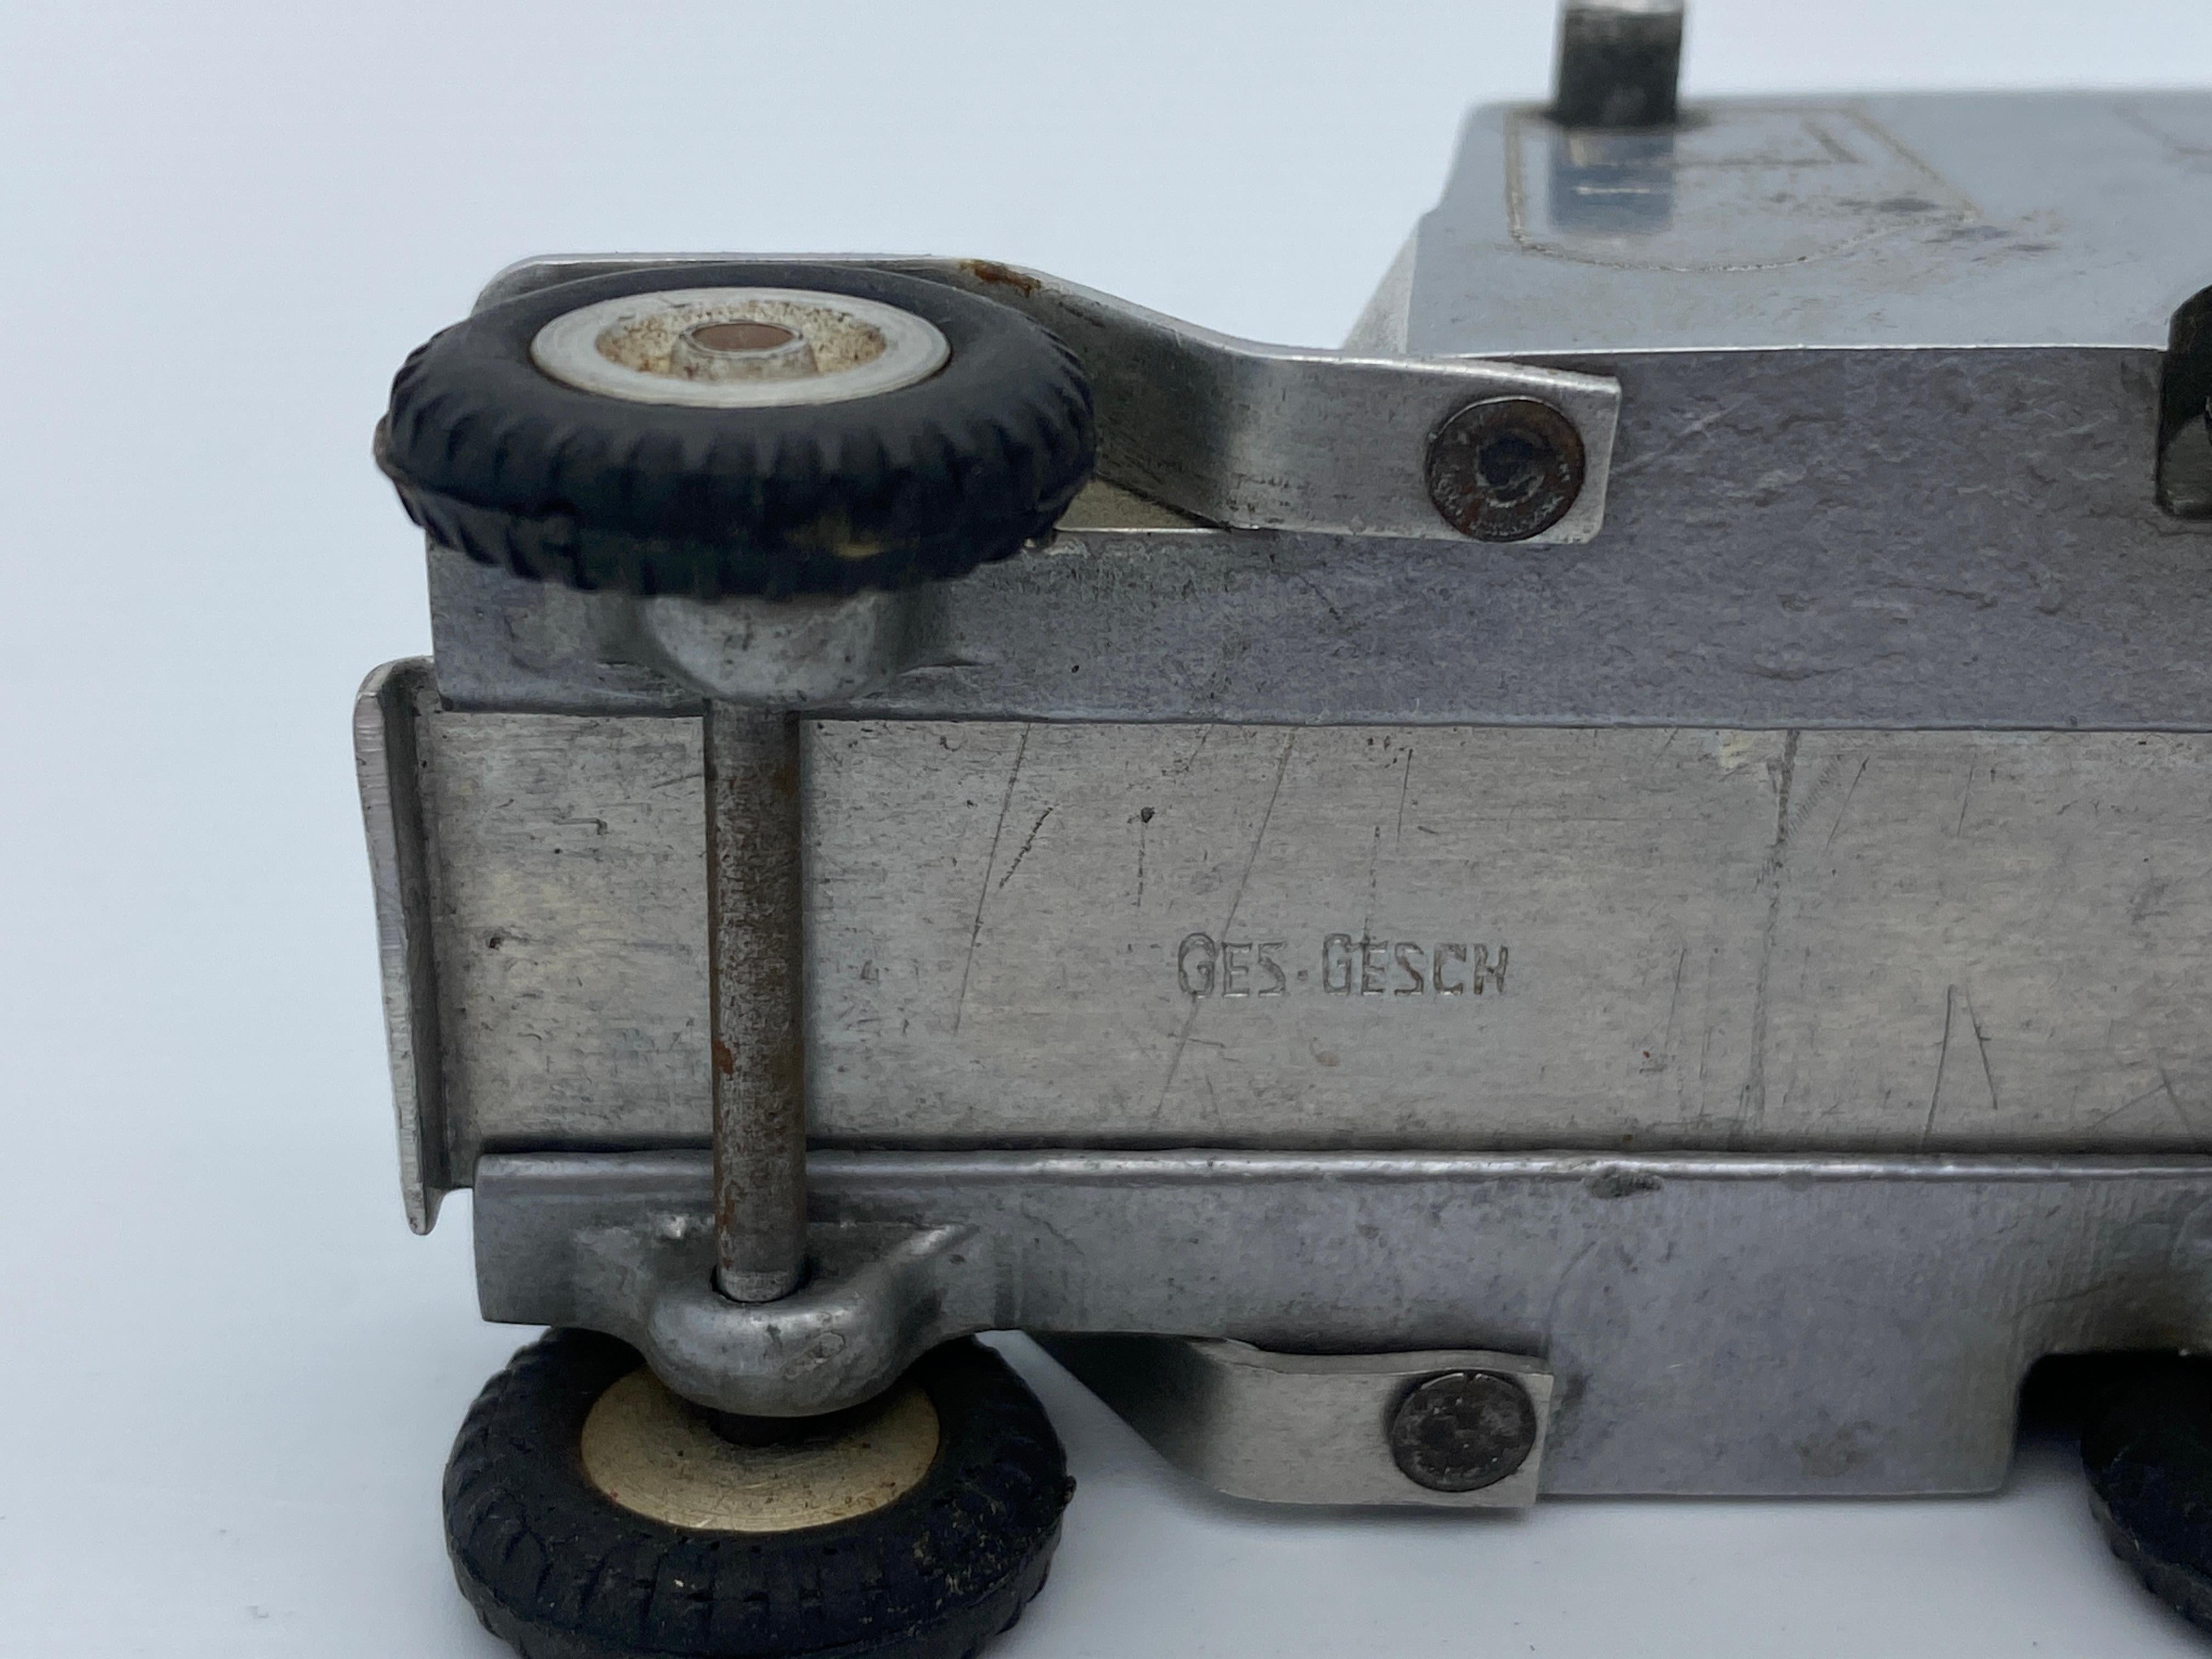 Rare Hand Machined Willys Jeep Ges-Gesch Table Lighter, West Germany by by Baier In Good Condition For Sale In Van Nuys, CA